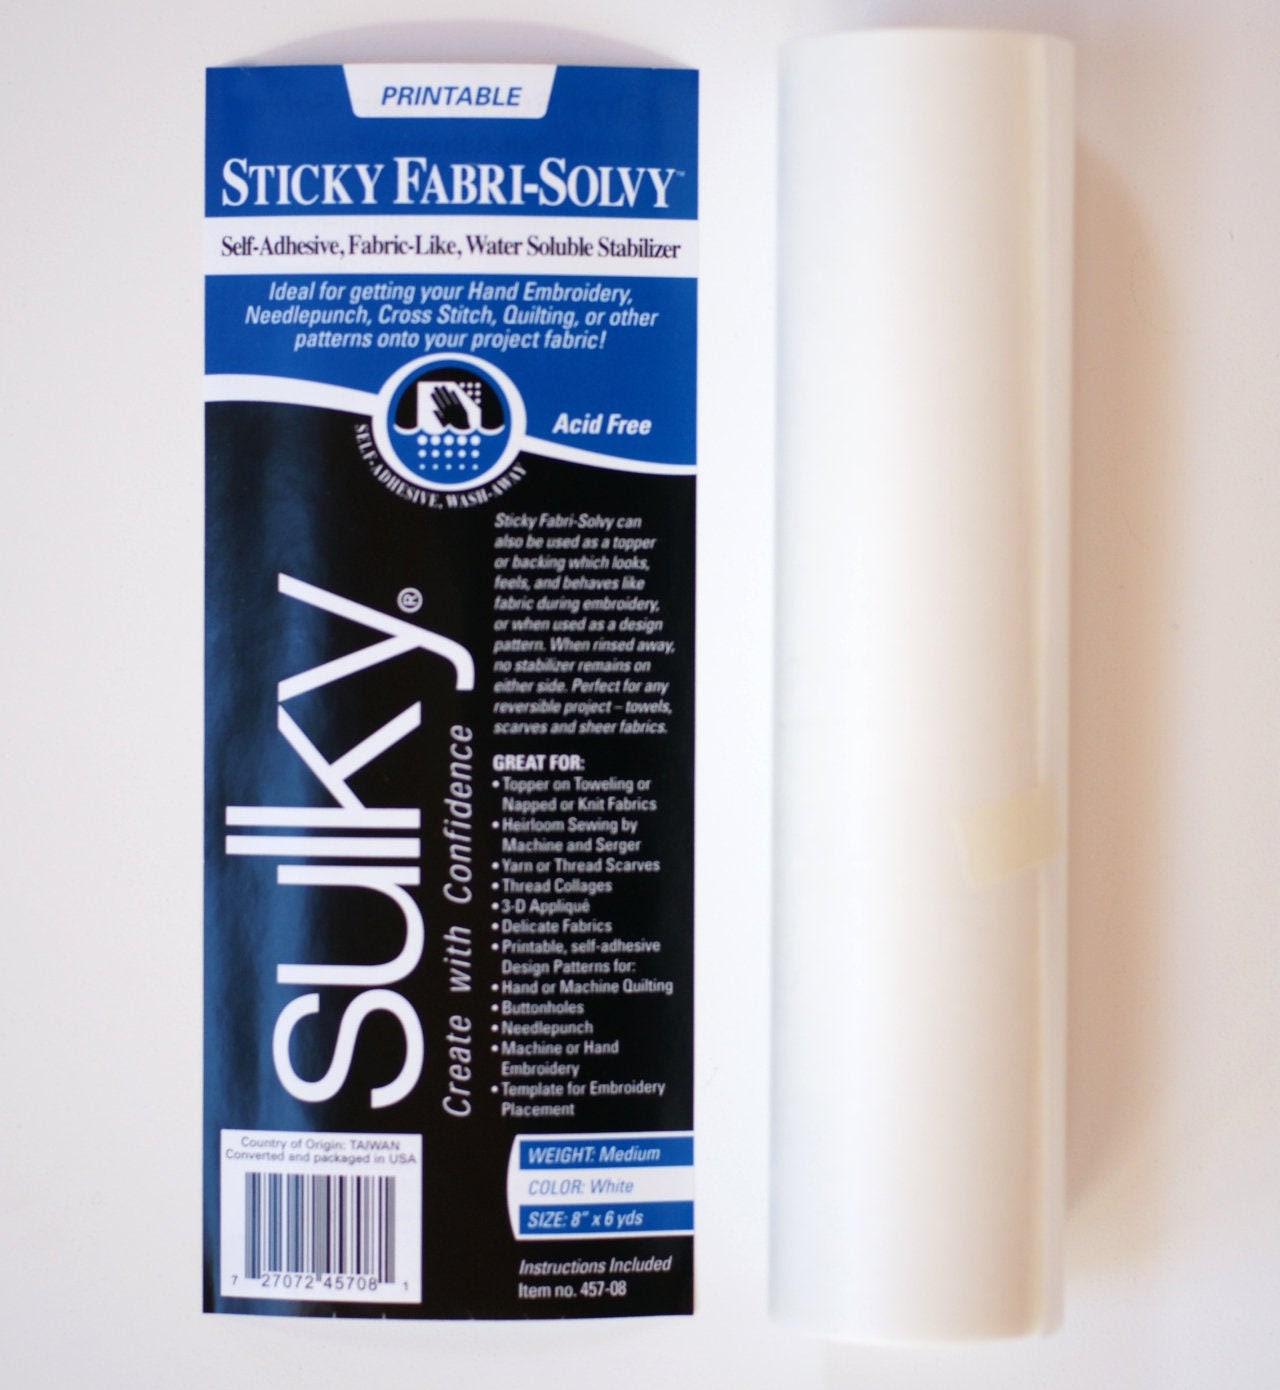 Sulky Sticky FabriSolvy, 8 inch roll x 6 yards, Printable, Water